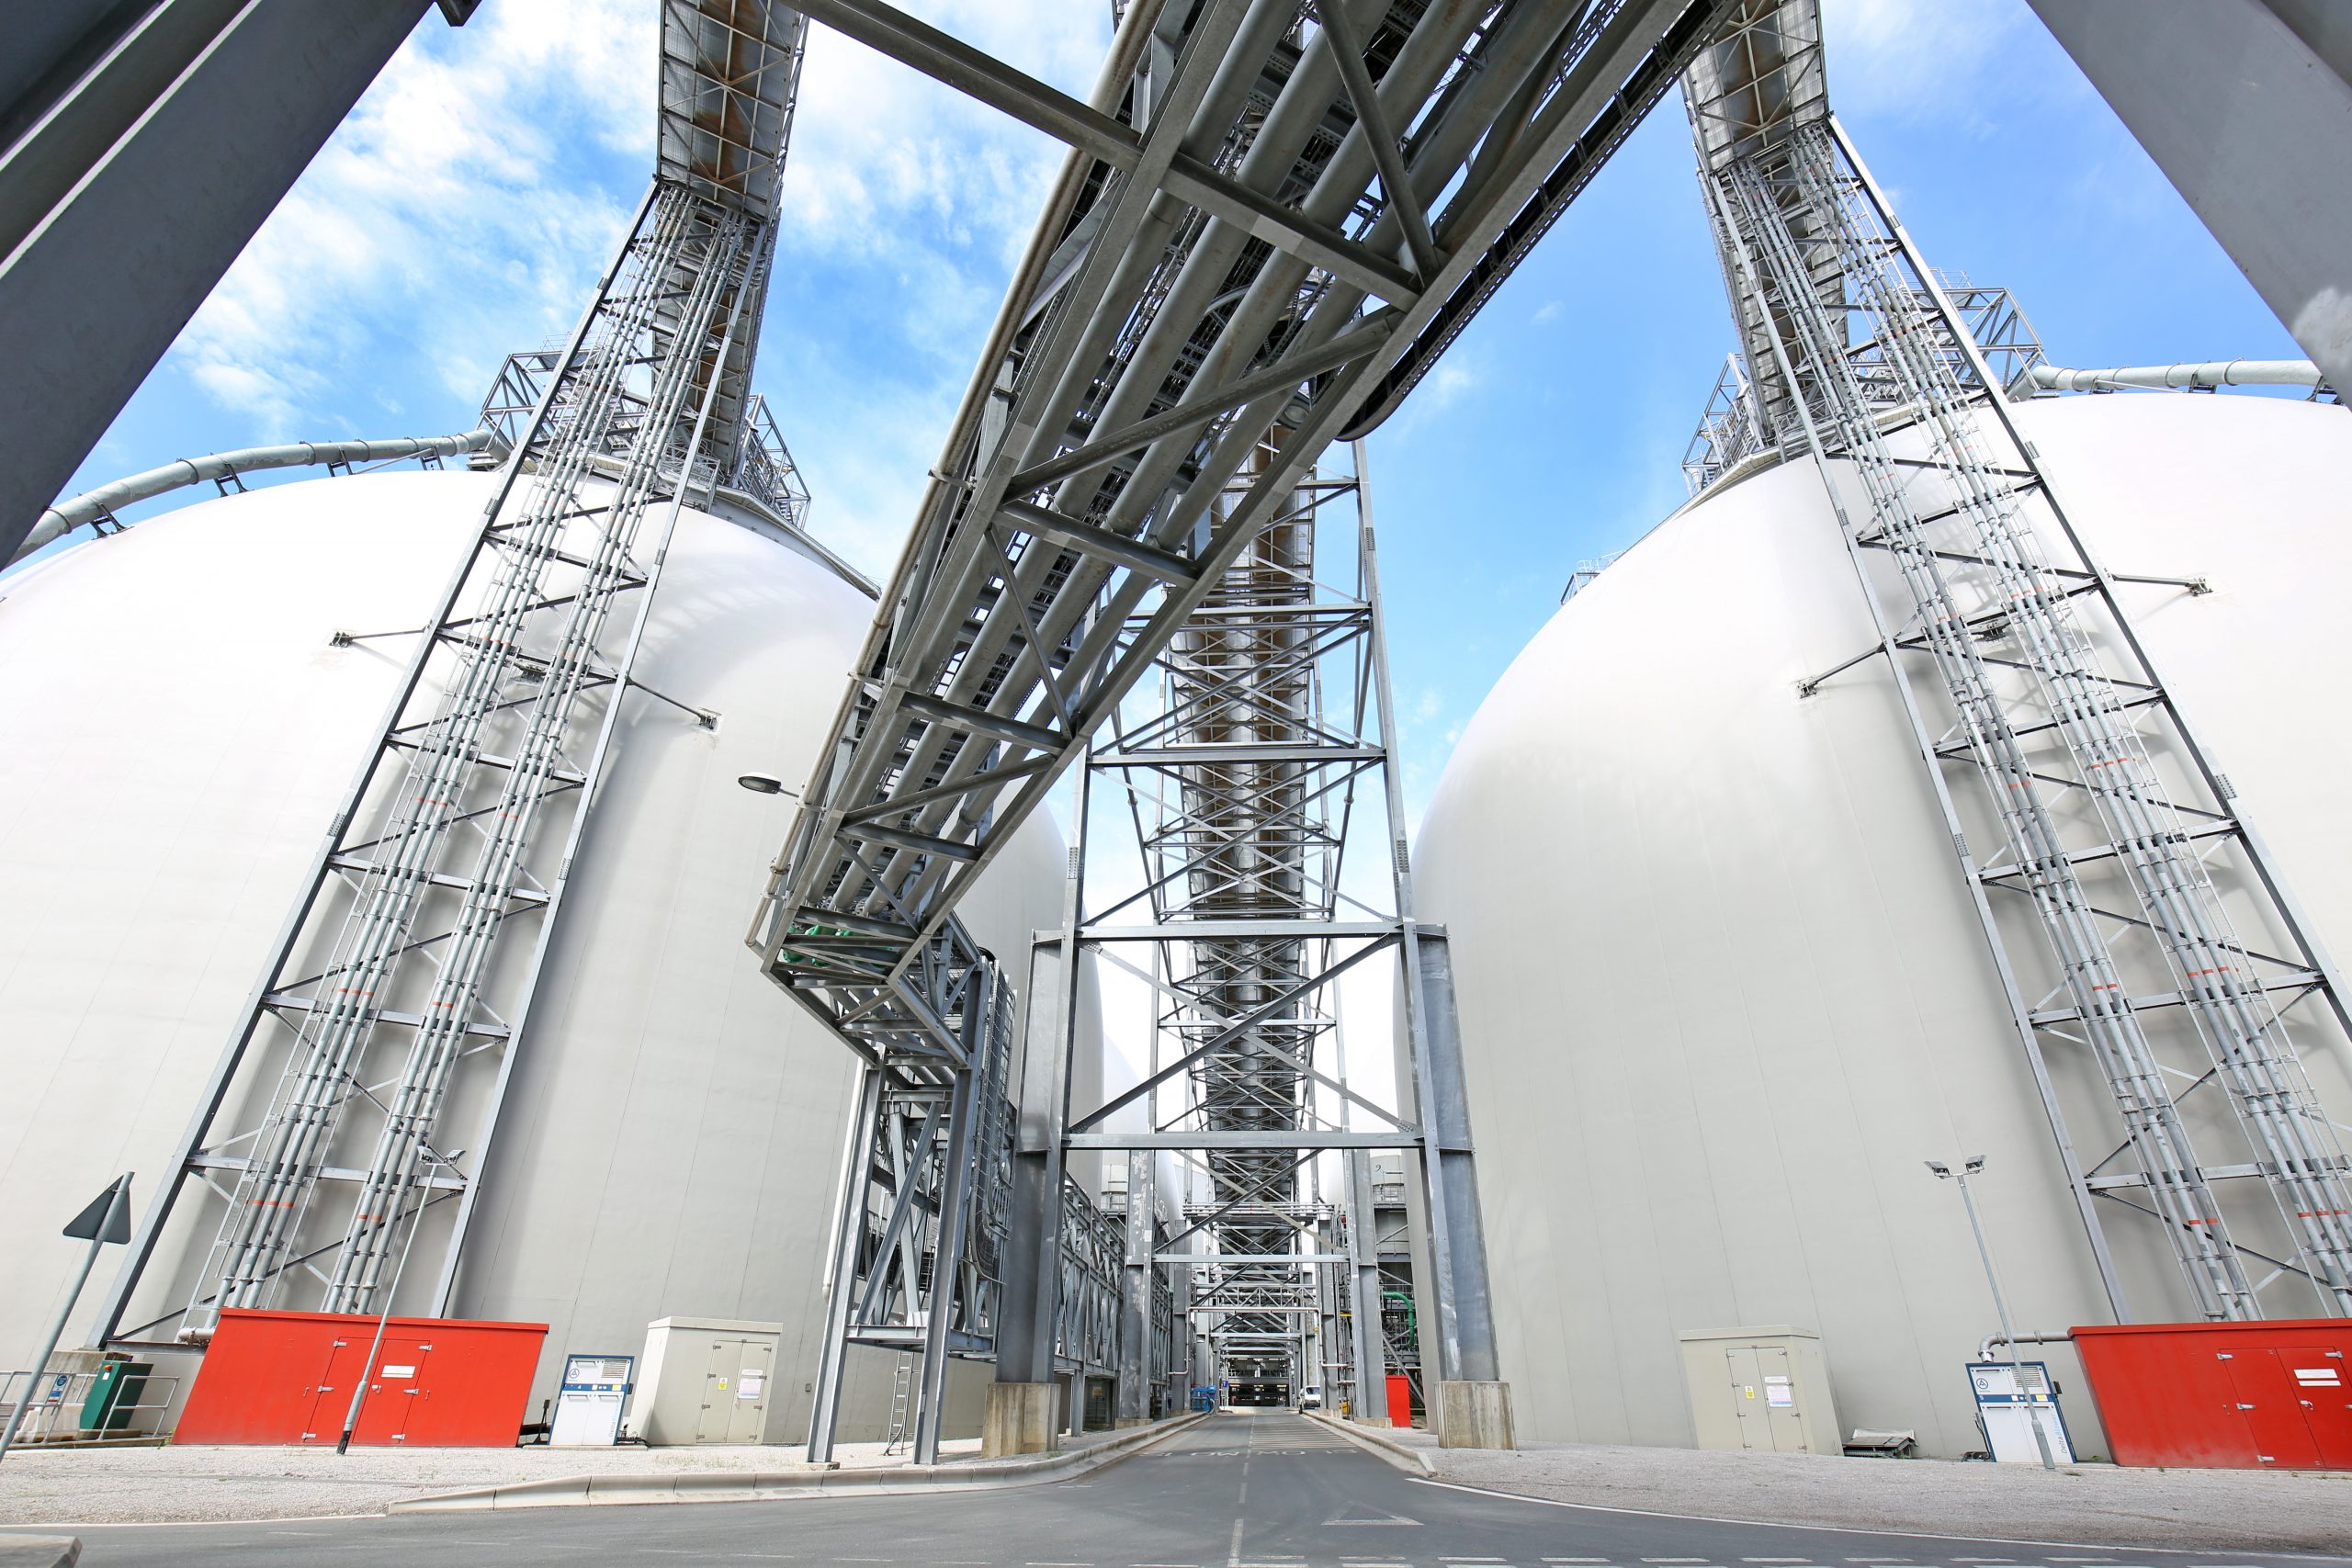 Sustainable biomass wood pellet storage domes at Drax Power Station in North Yorkshire